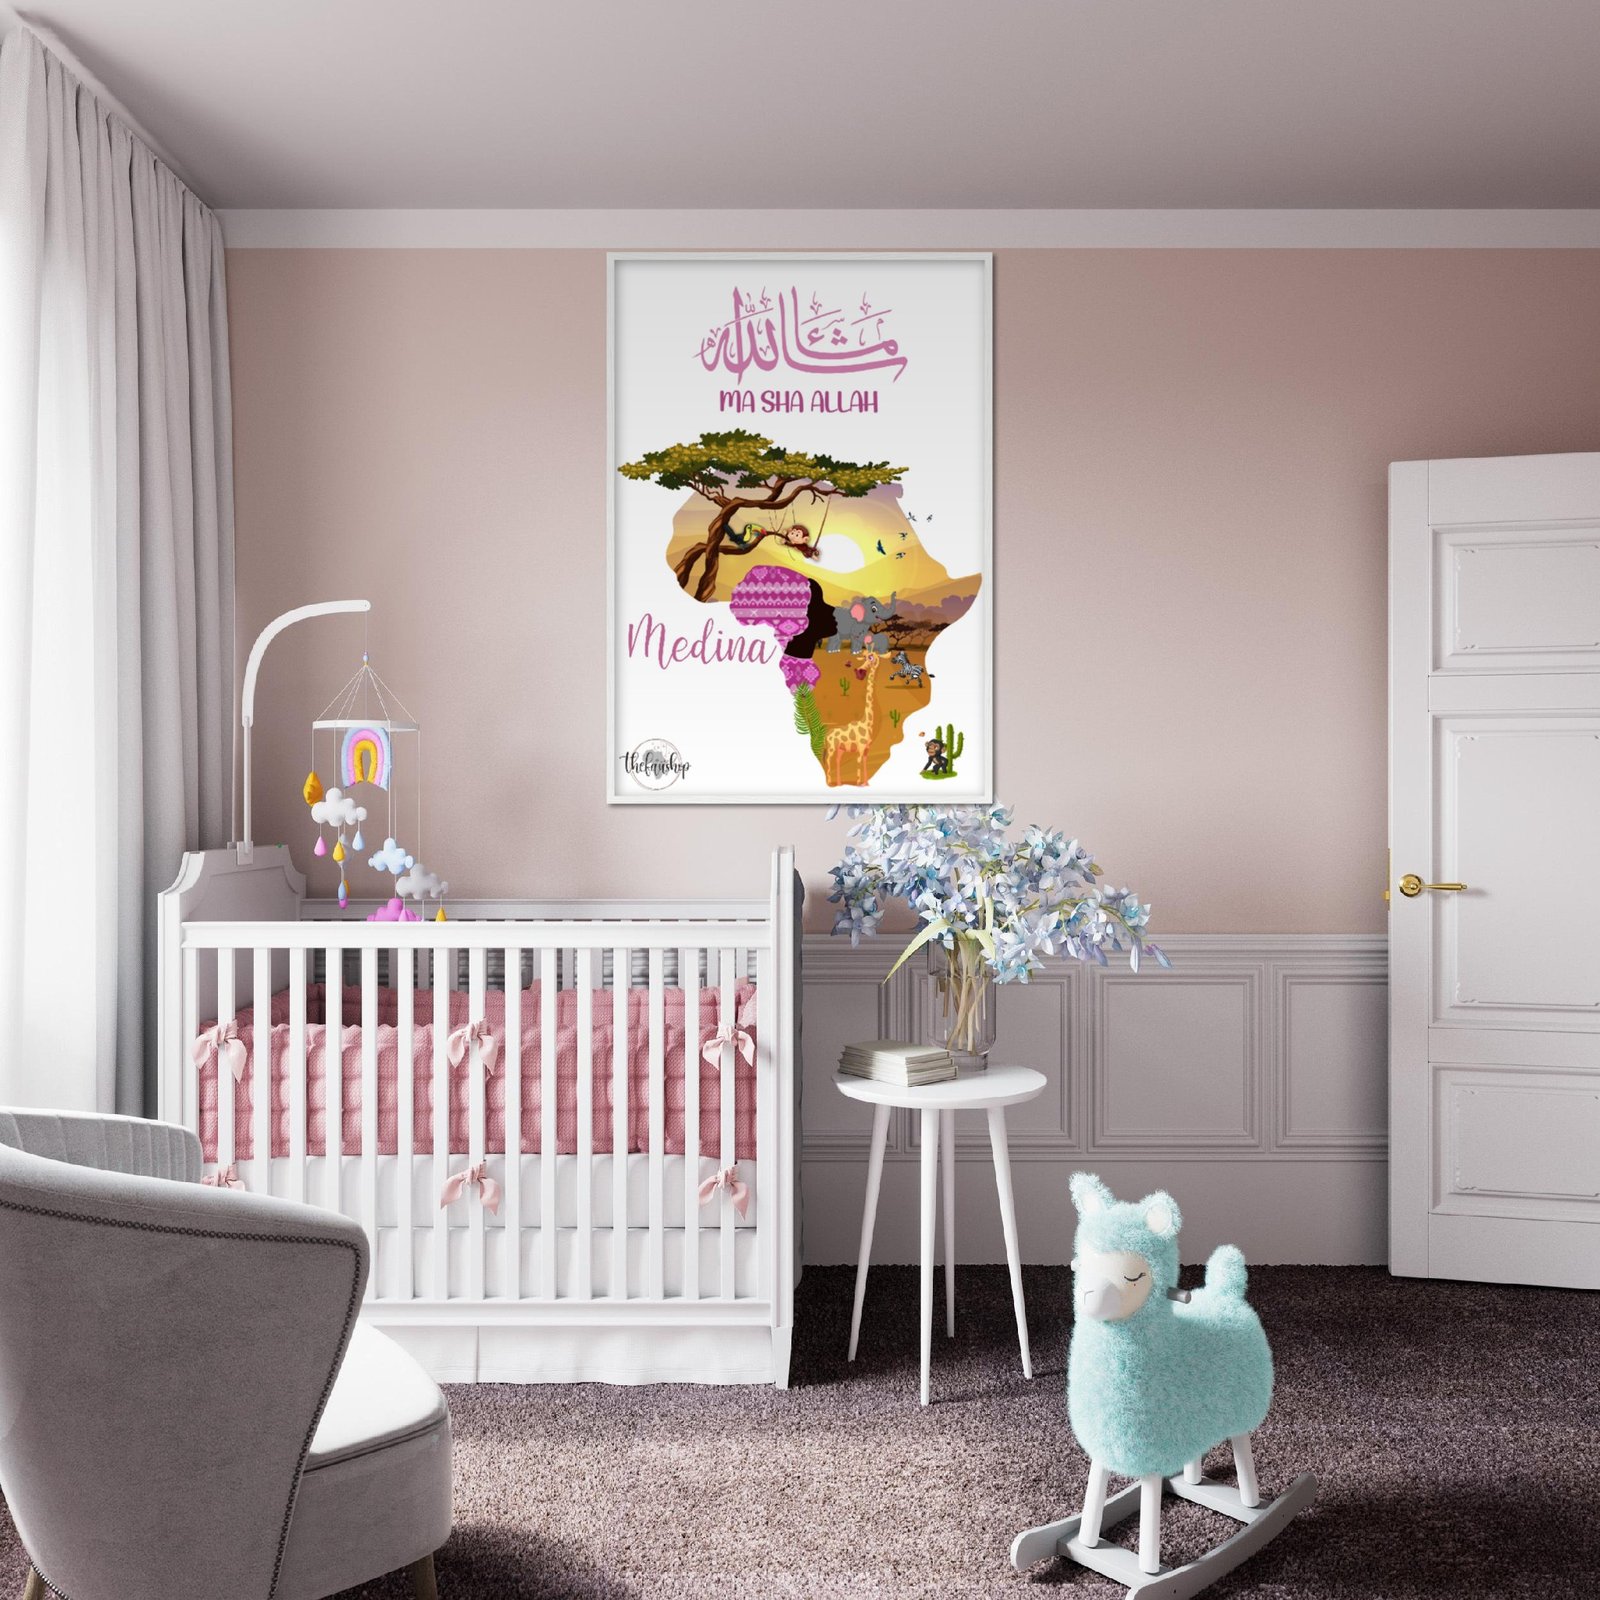 Nursery Wall Art Decals: Nursery Wall Art Decals South Africa